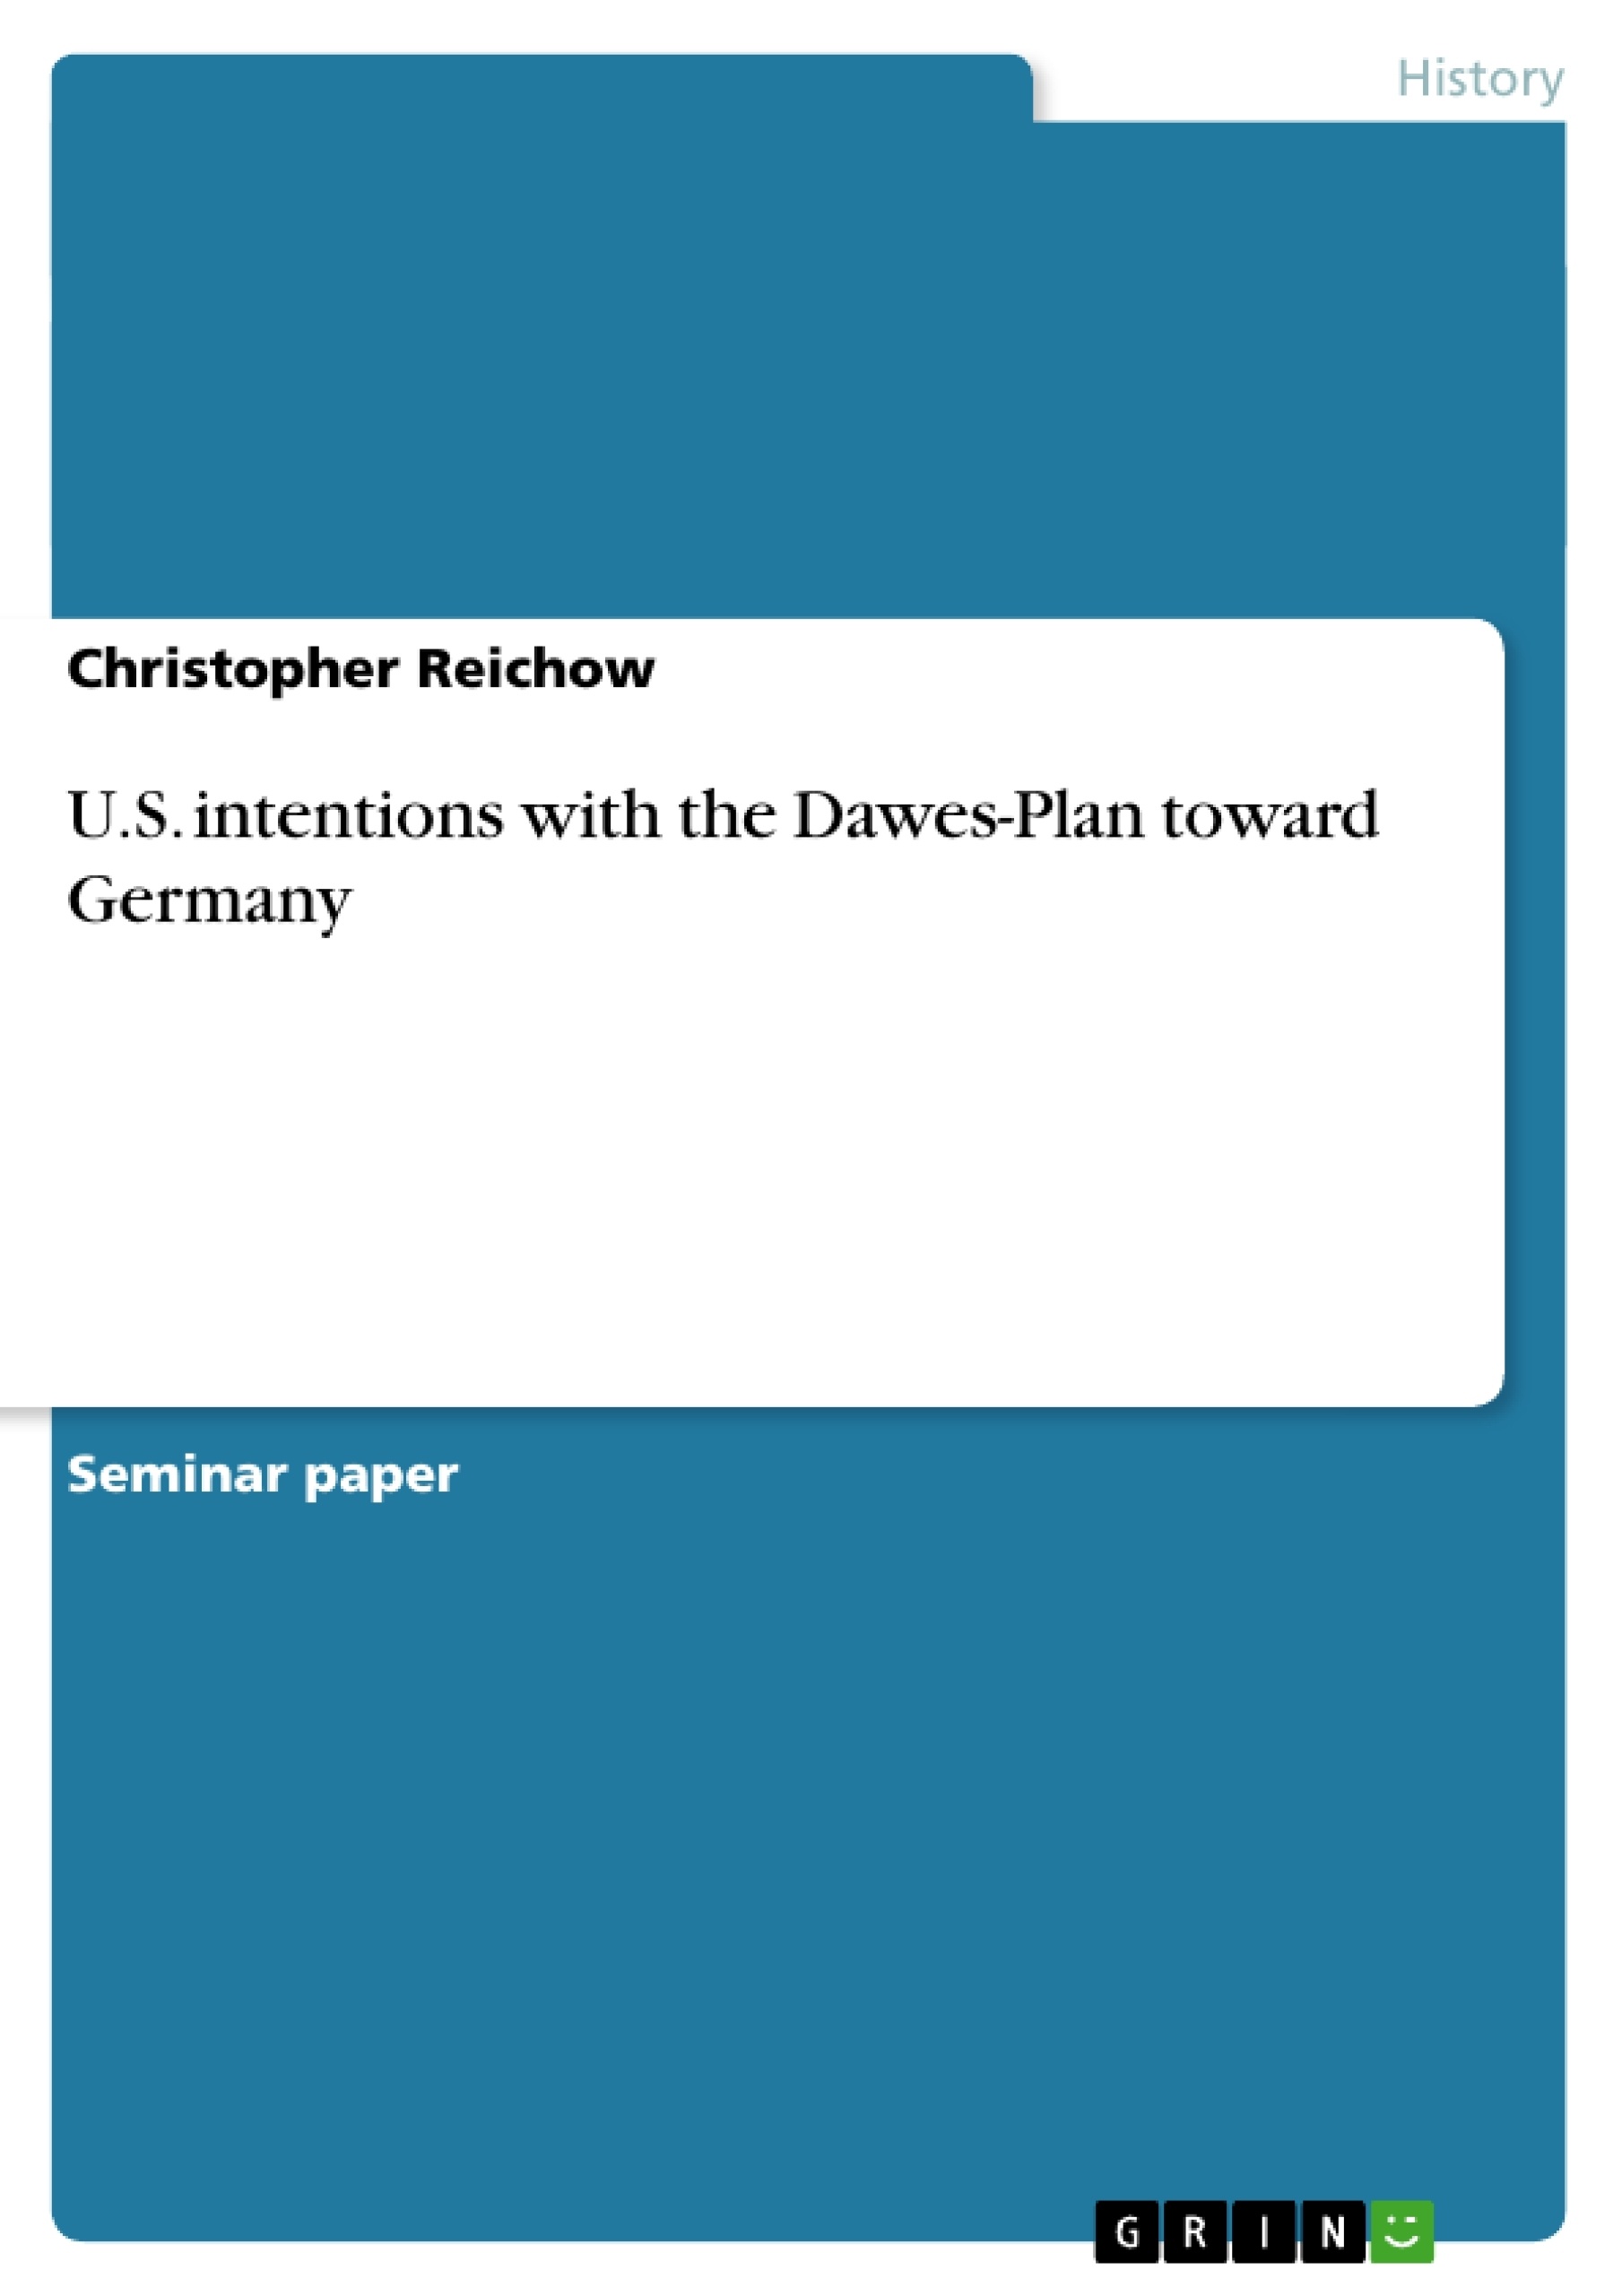 Title: U.S. intentions with the Dawes-Plan toward Germany